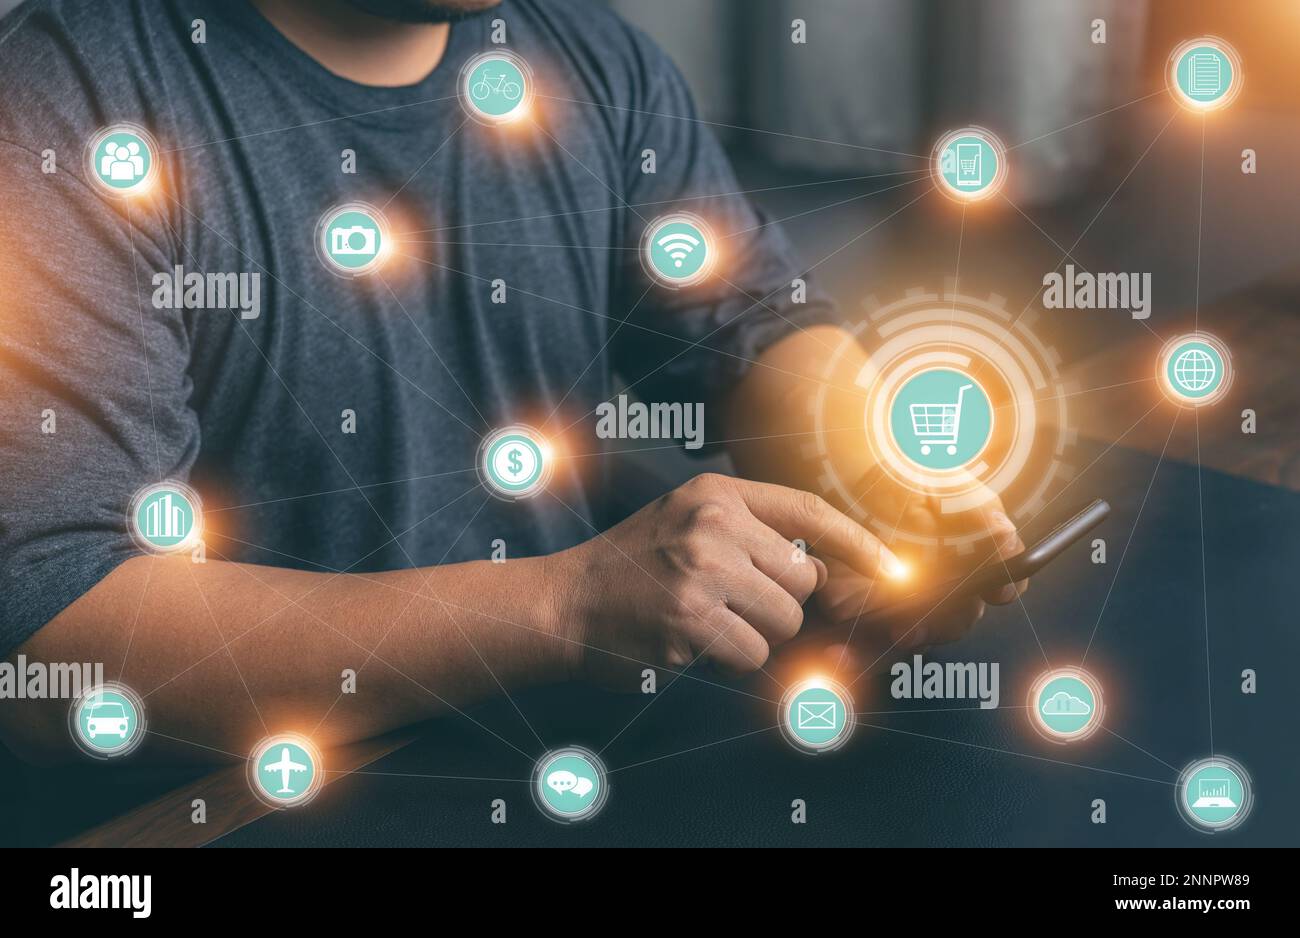 People hands using smartphone and laptop with online banking network icon screen. Online payment digital and shopping online. marketing, financial. Gl Stock Photo